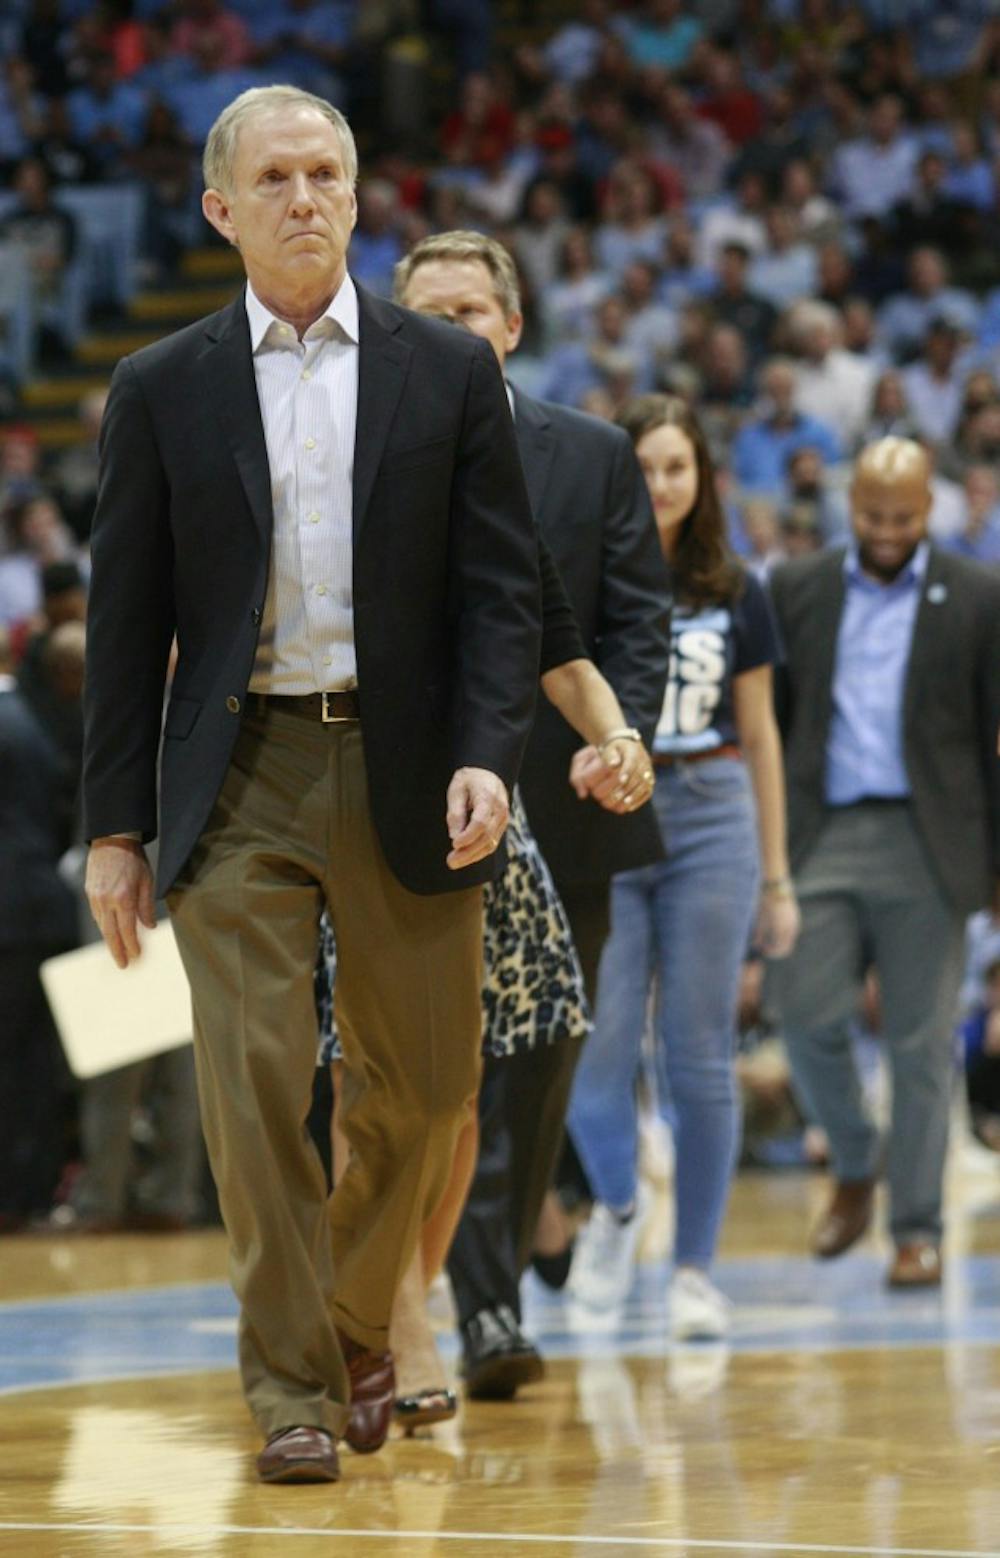 Chapel Hill alumnus William McLean leads Chancellor Folt and Science Scholas after speaking about the initiative during halftime of the Men's Basketball game at UNC versus N.C. State at the Smith Center on Tuesday, Feb. 5, 2019. 